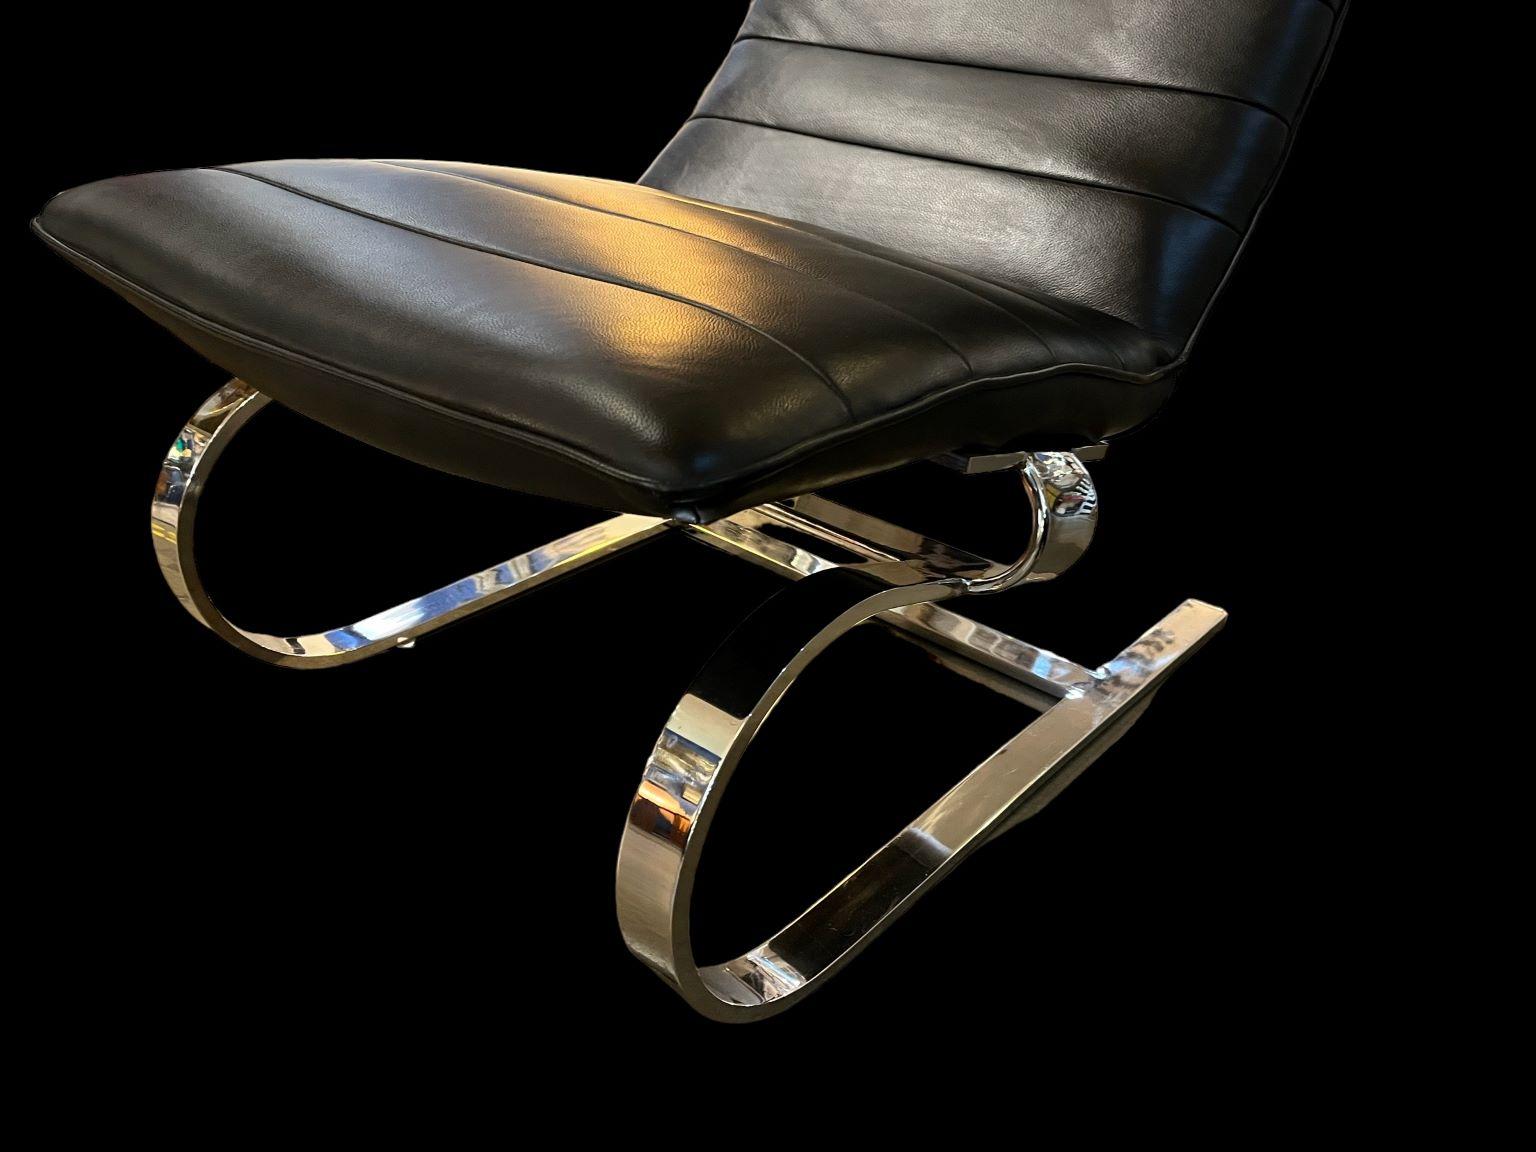 20th Century Chrome And Black Leather Modernist Chair In The Style Of Poul Kjaerholm